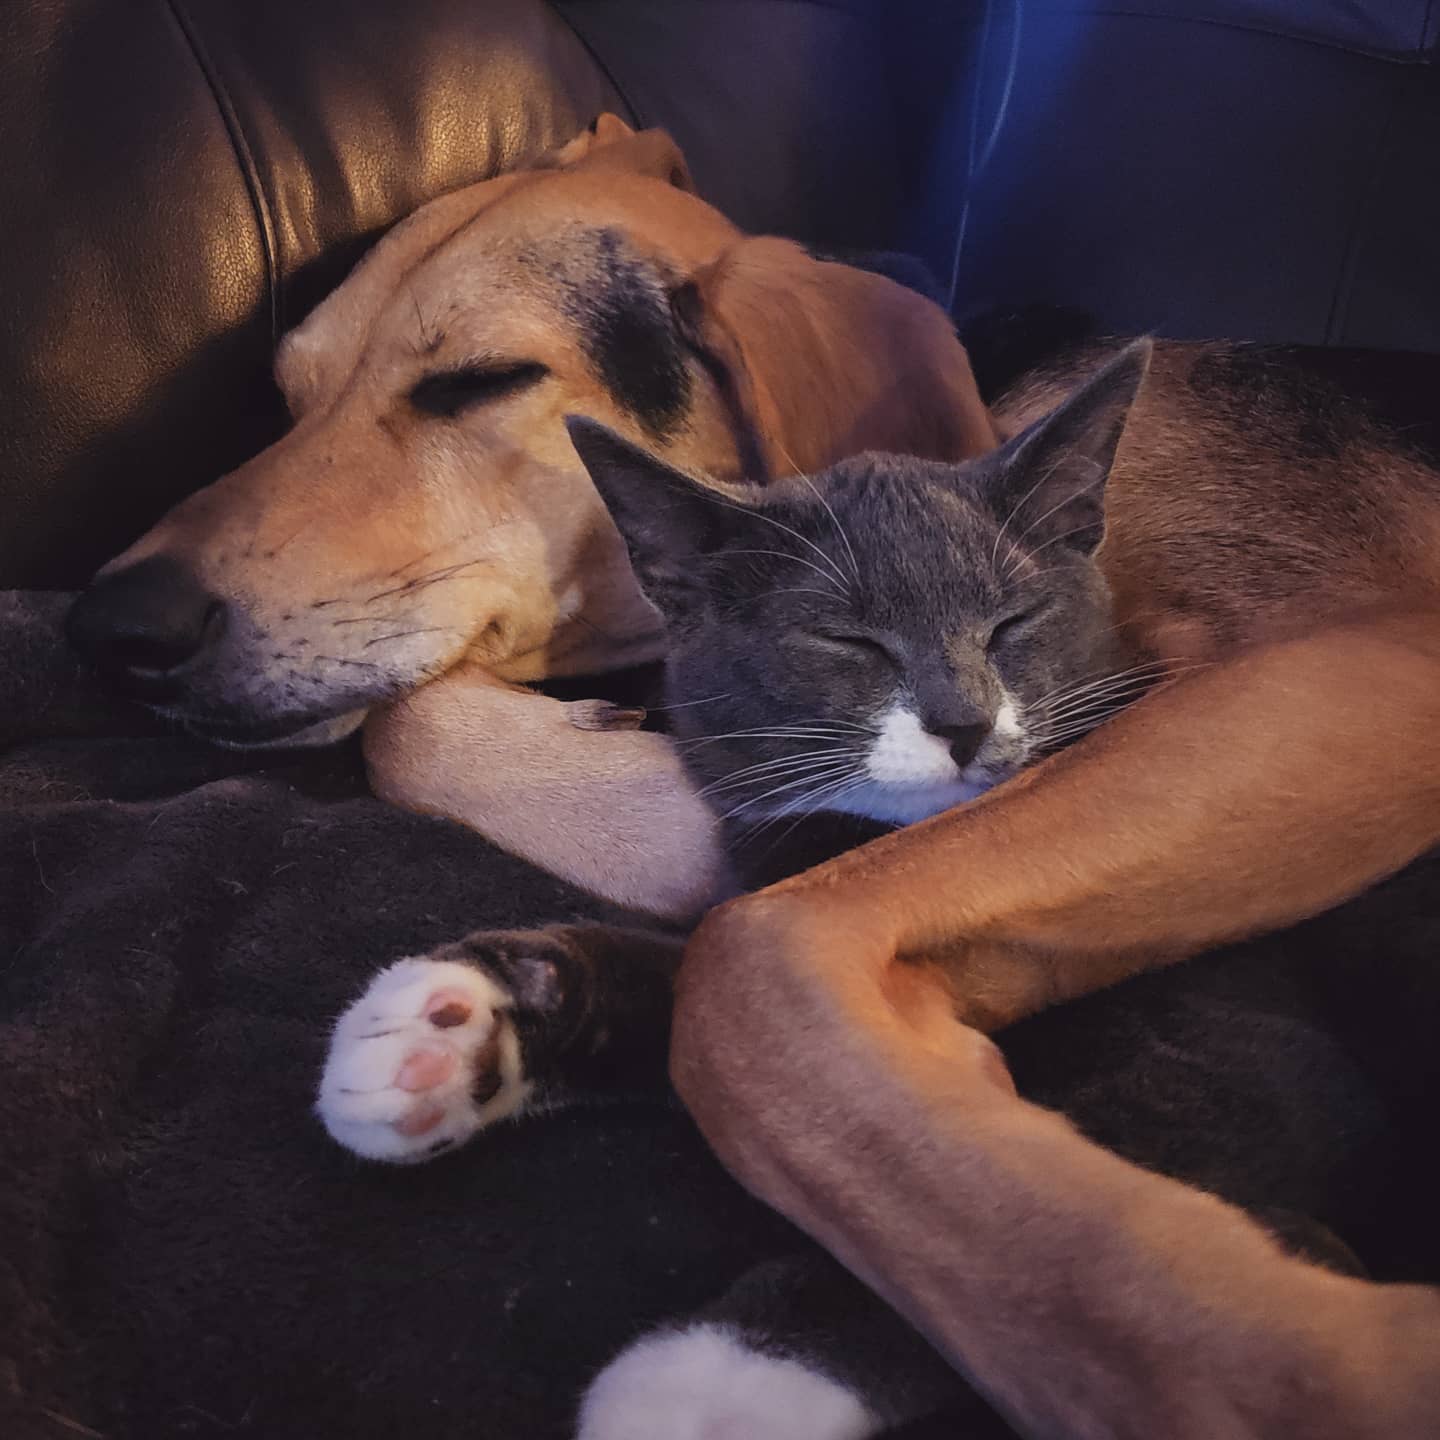 Pet-n-Sur - Dogs and cats being friends